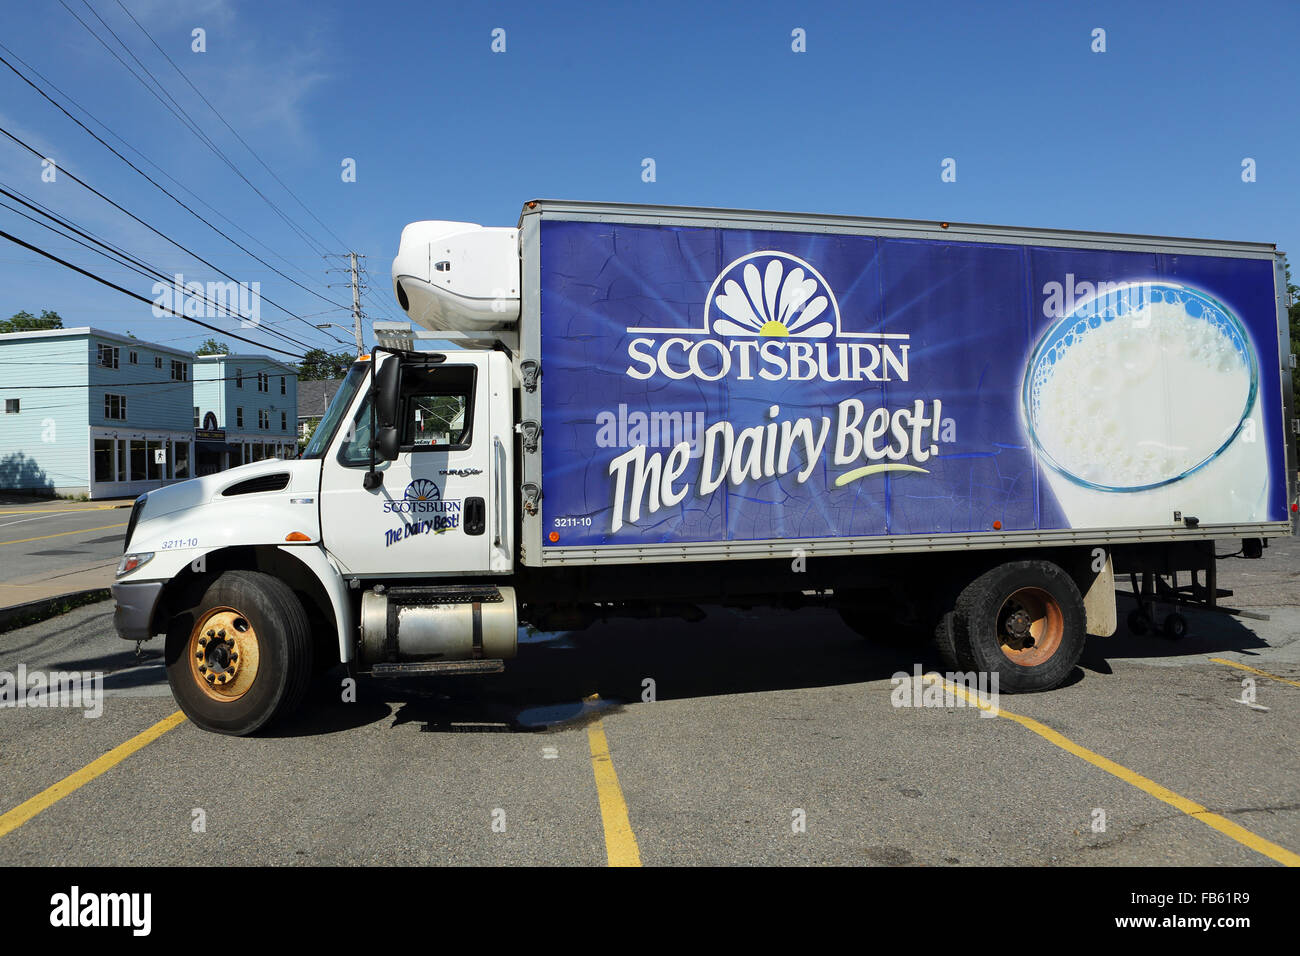 A delivery truck in a parking lot at Mahone Bay in Nova Scotia, Canada. The advert on the side is for dairy produce. Stock Photo